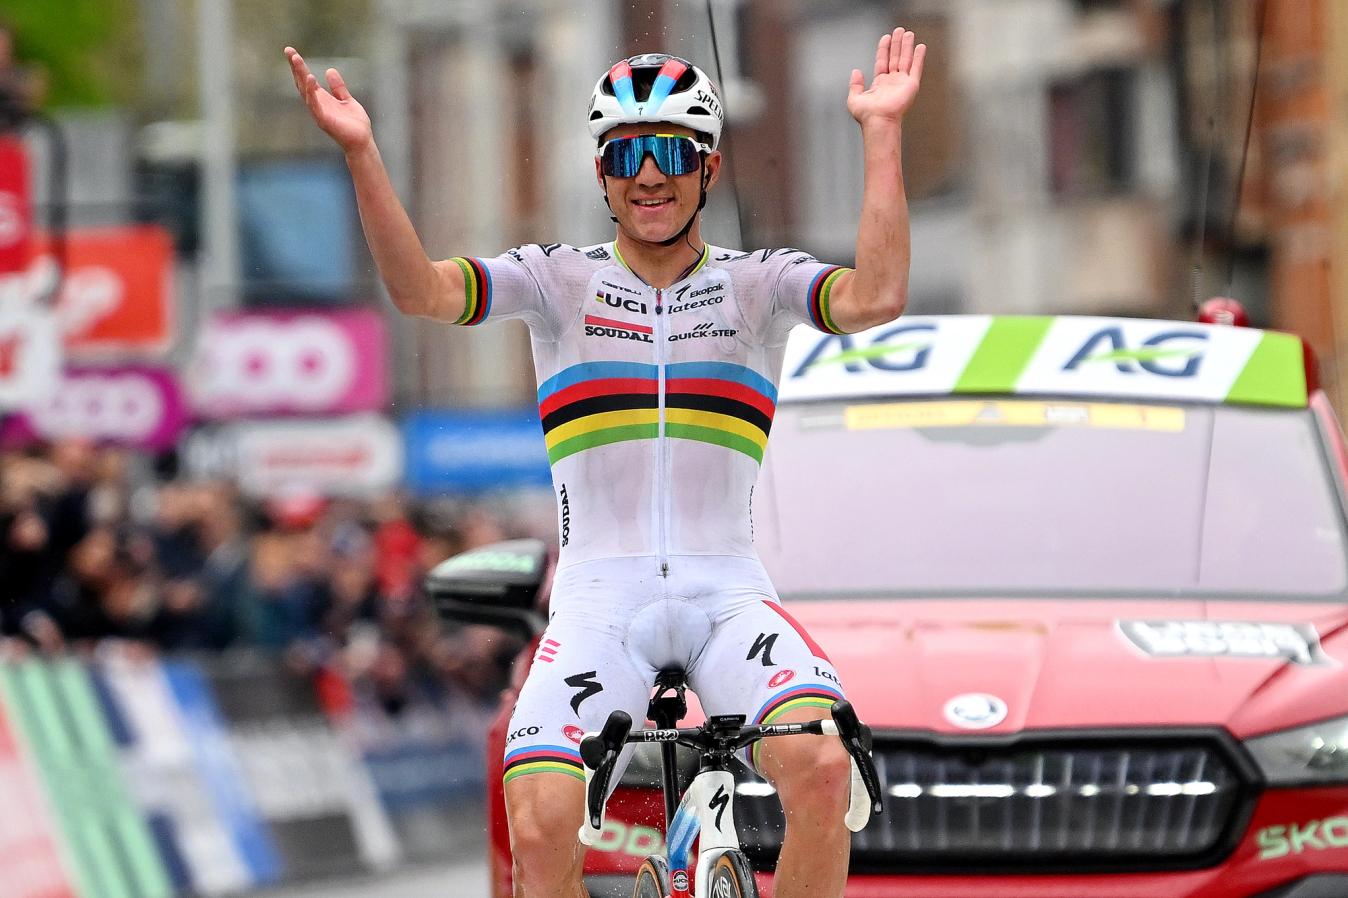 Remco Evenepoel won Liège-Bastogne-Liège atop the Specialized Tarmac SL7 which has since been upgraded with the Tarmac SL8